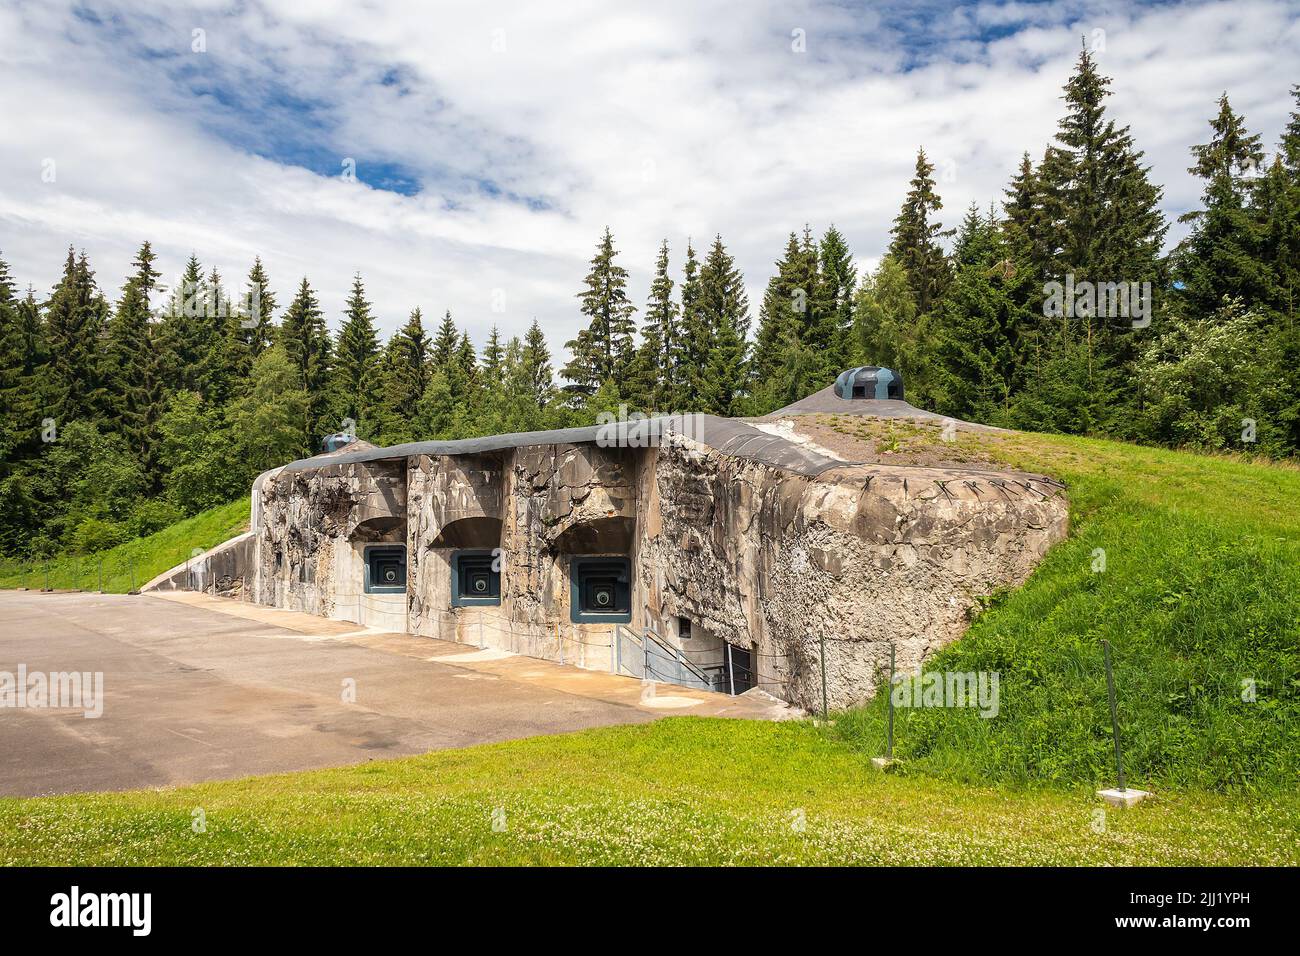 military bunker R-H-S 79 Na Mytine at Orlicke hory, Czech republic, Czechoslovak border fortifications from before WW II Stock Photo